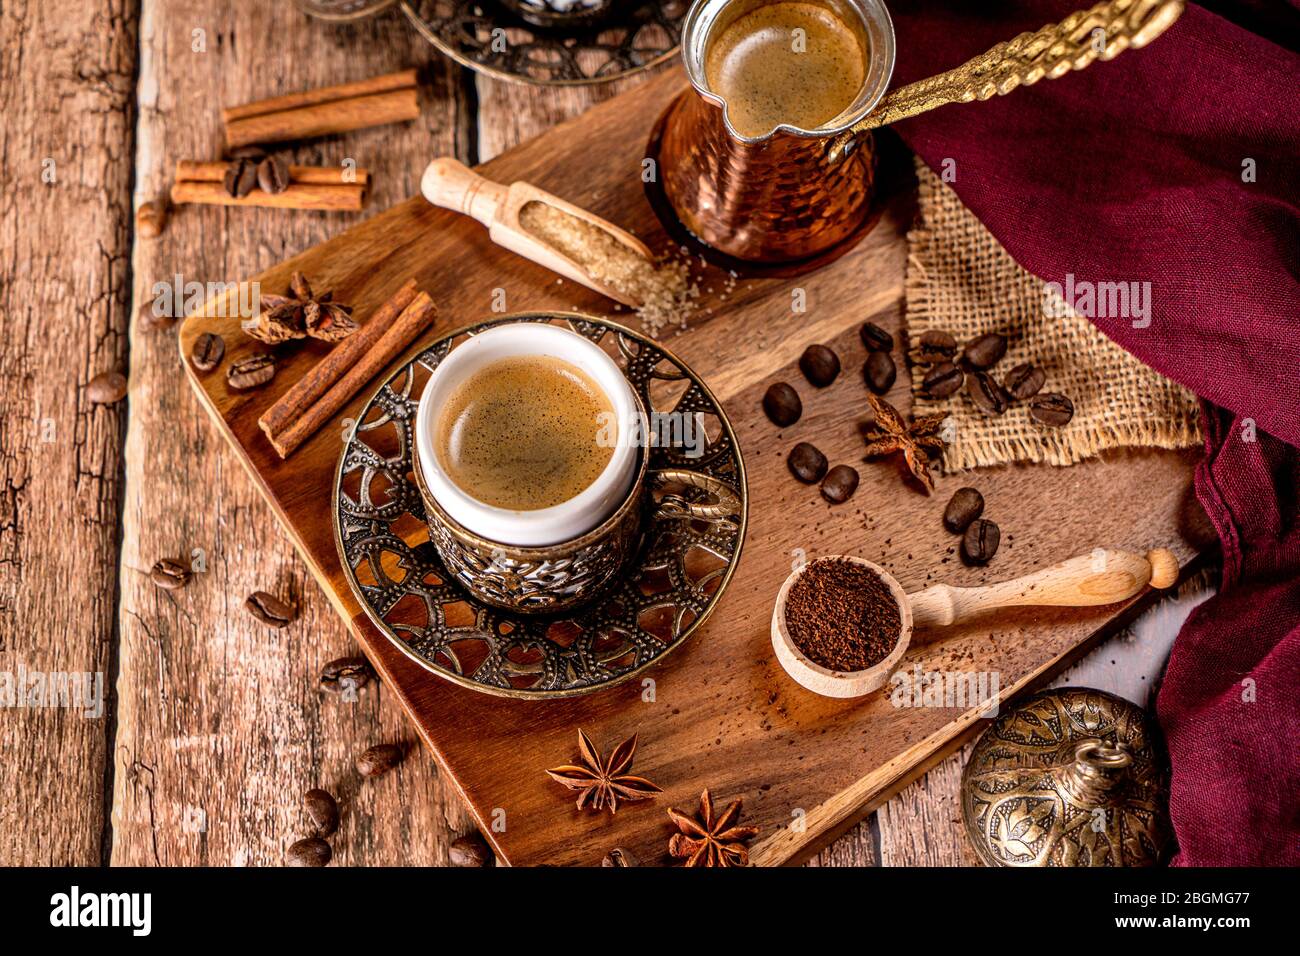 Coffee concept photography on a natural wood background Stock Photo